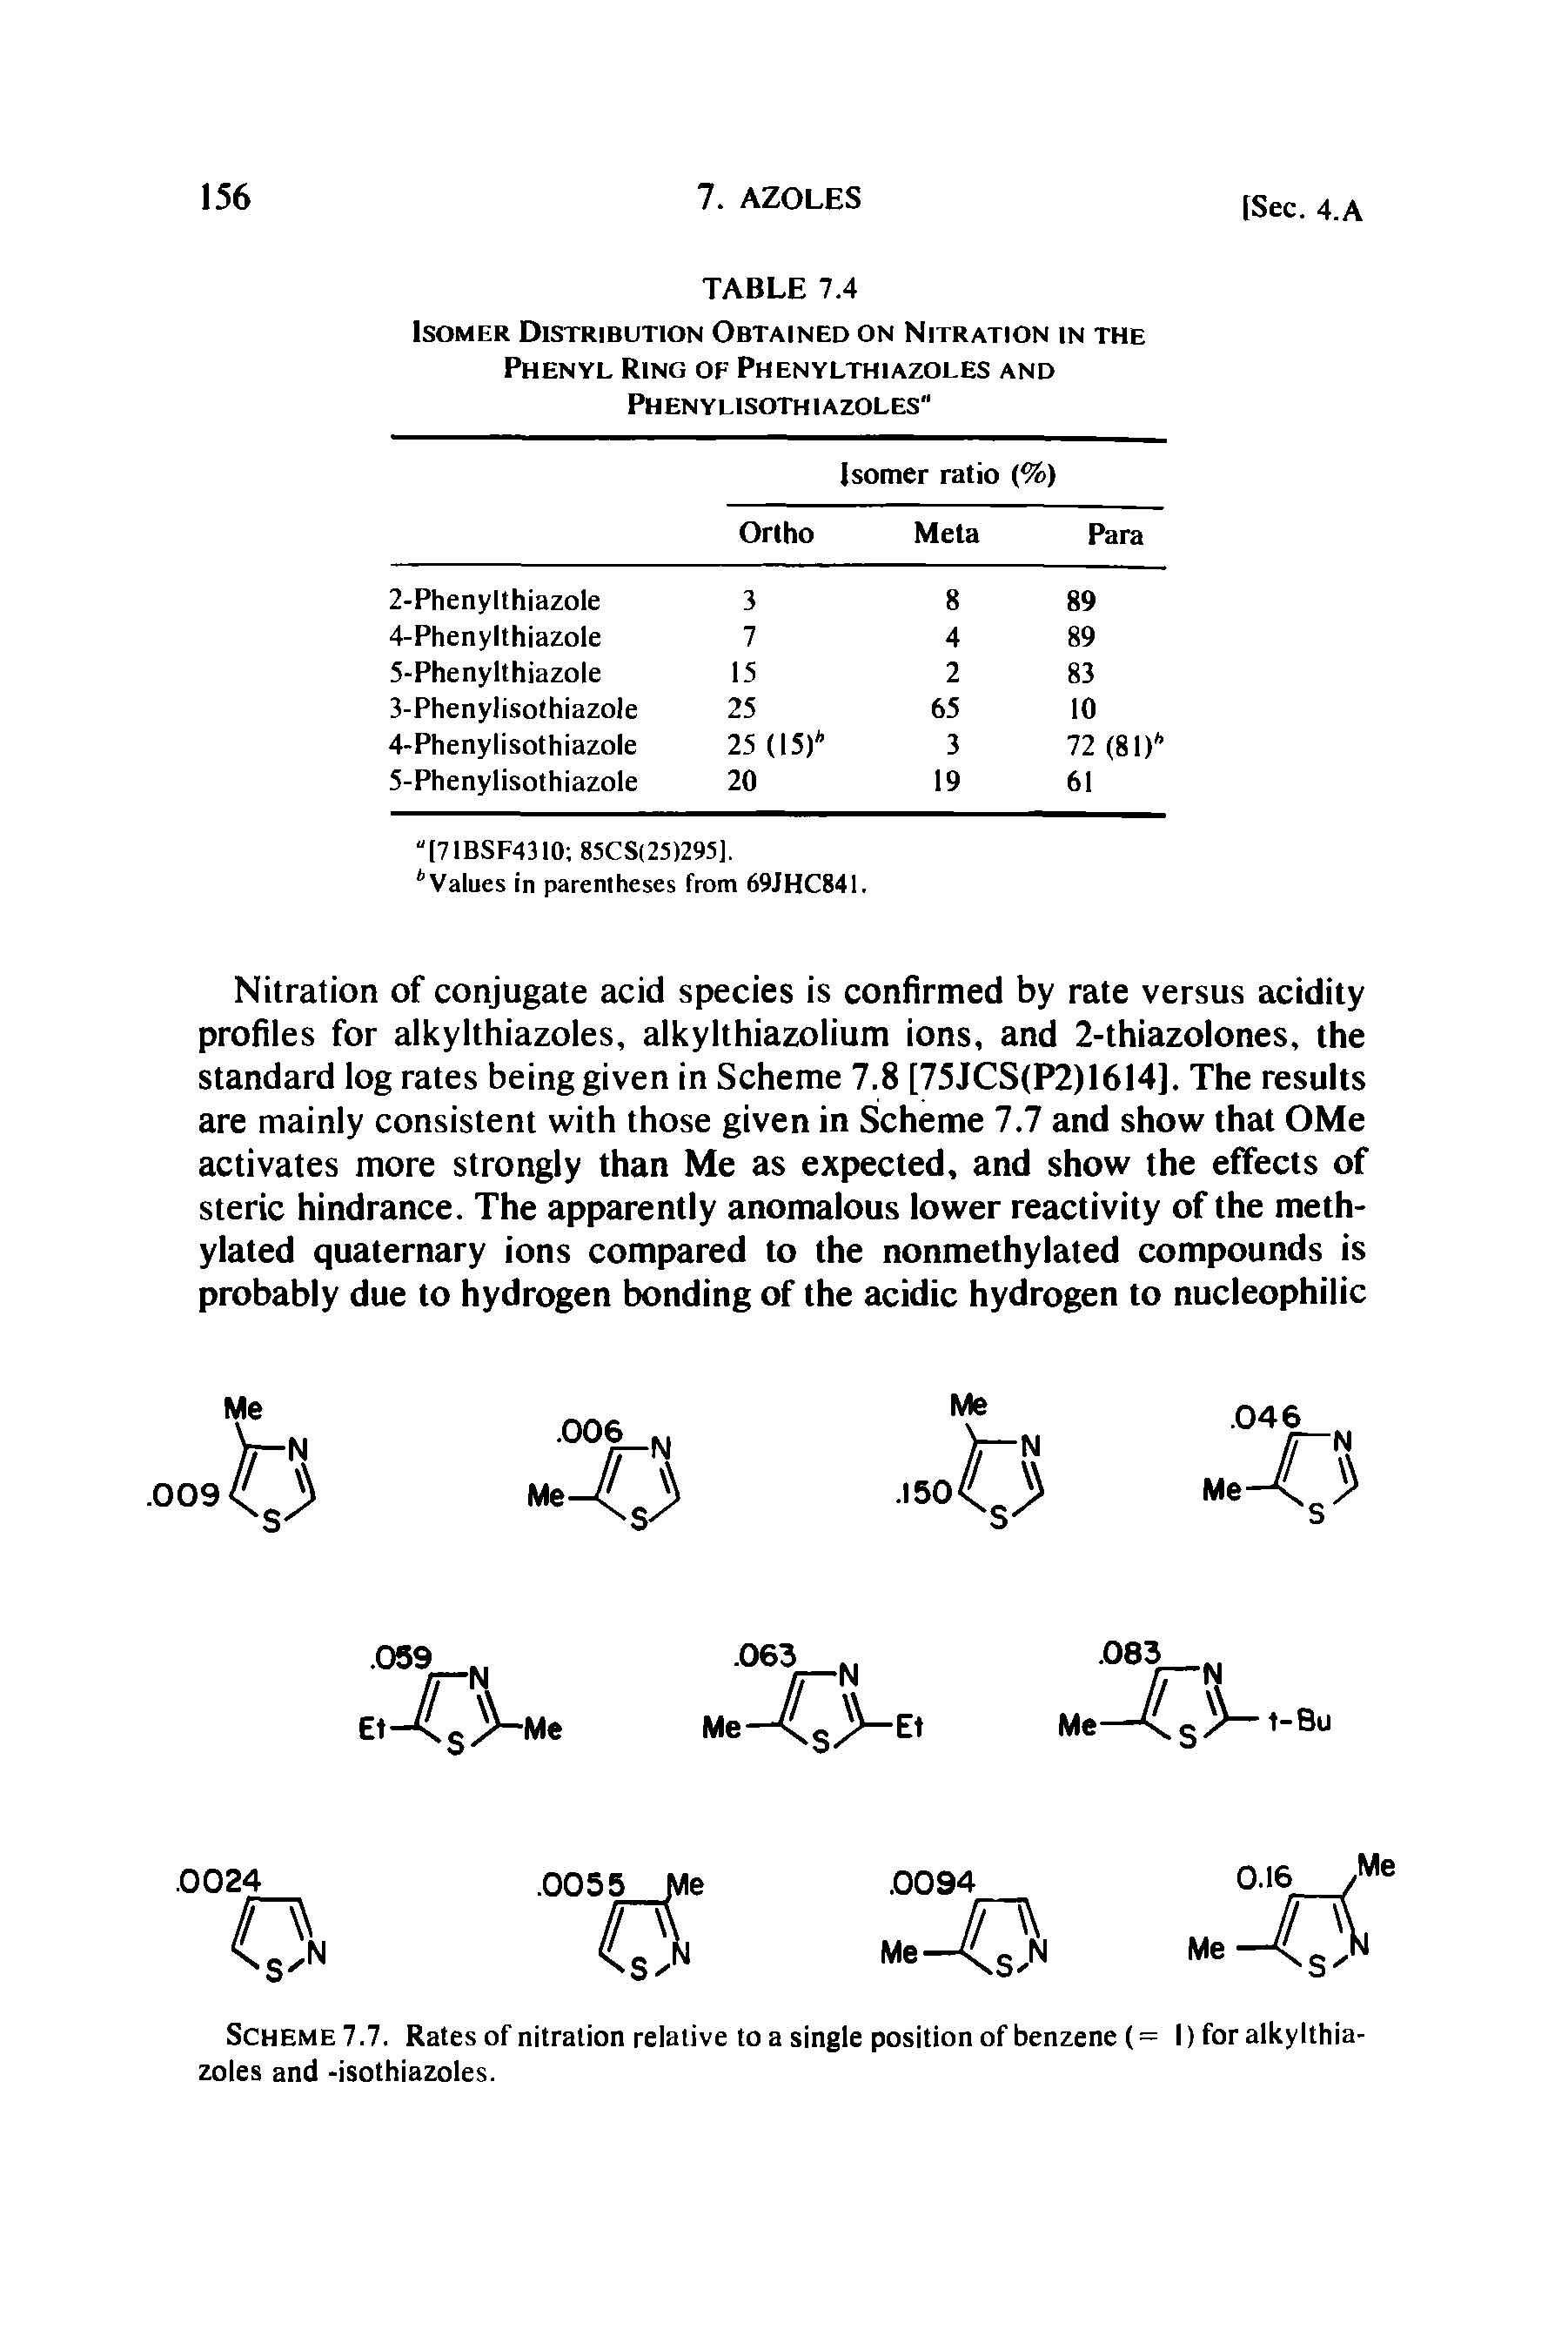 Scheme 7.7. Rates of nitration relative to a single position of benzene (= I) for alkylthiazoles and -isothiazoles.